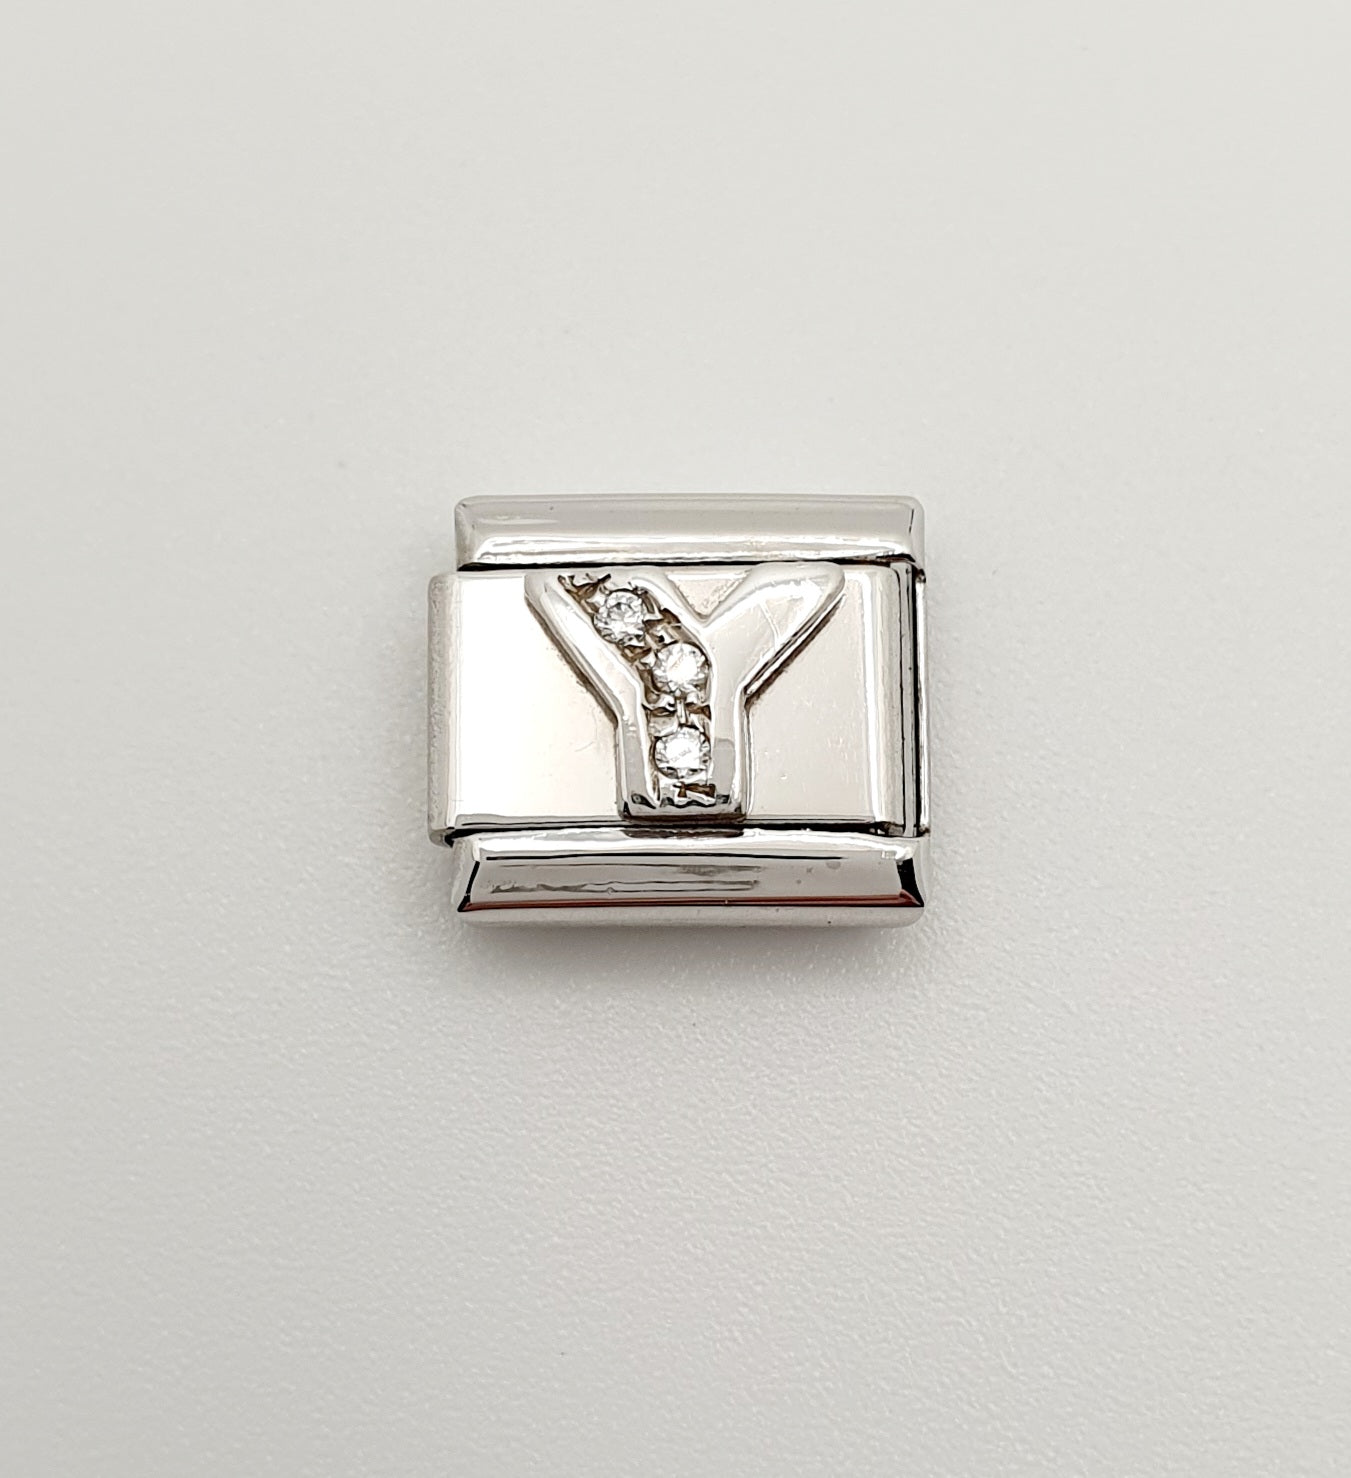 Nomination Charm Link "Y" Stainless Steel with CZ's & 925 Silver, 330301 25